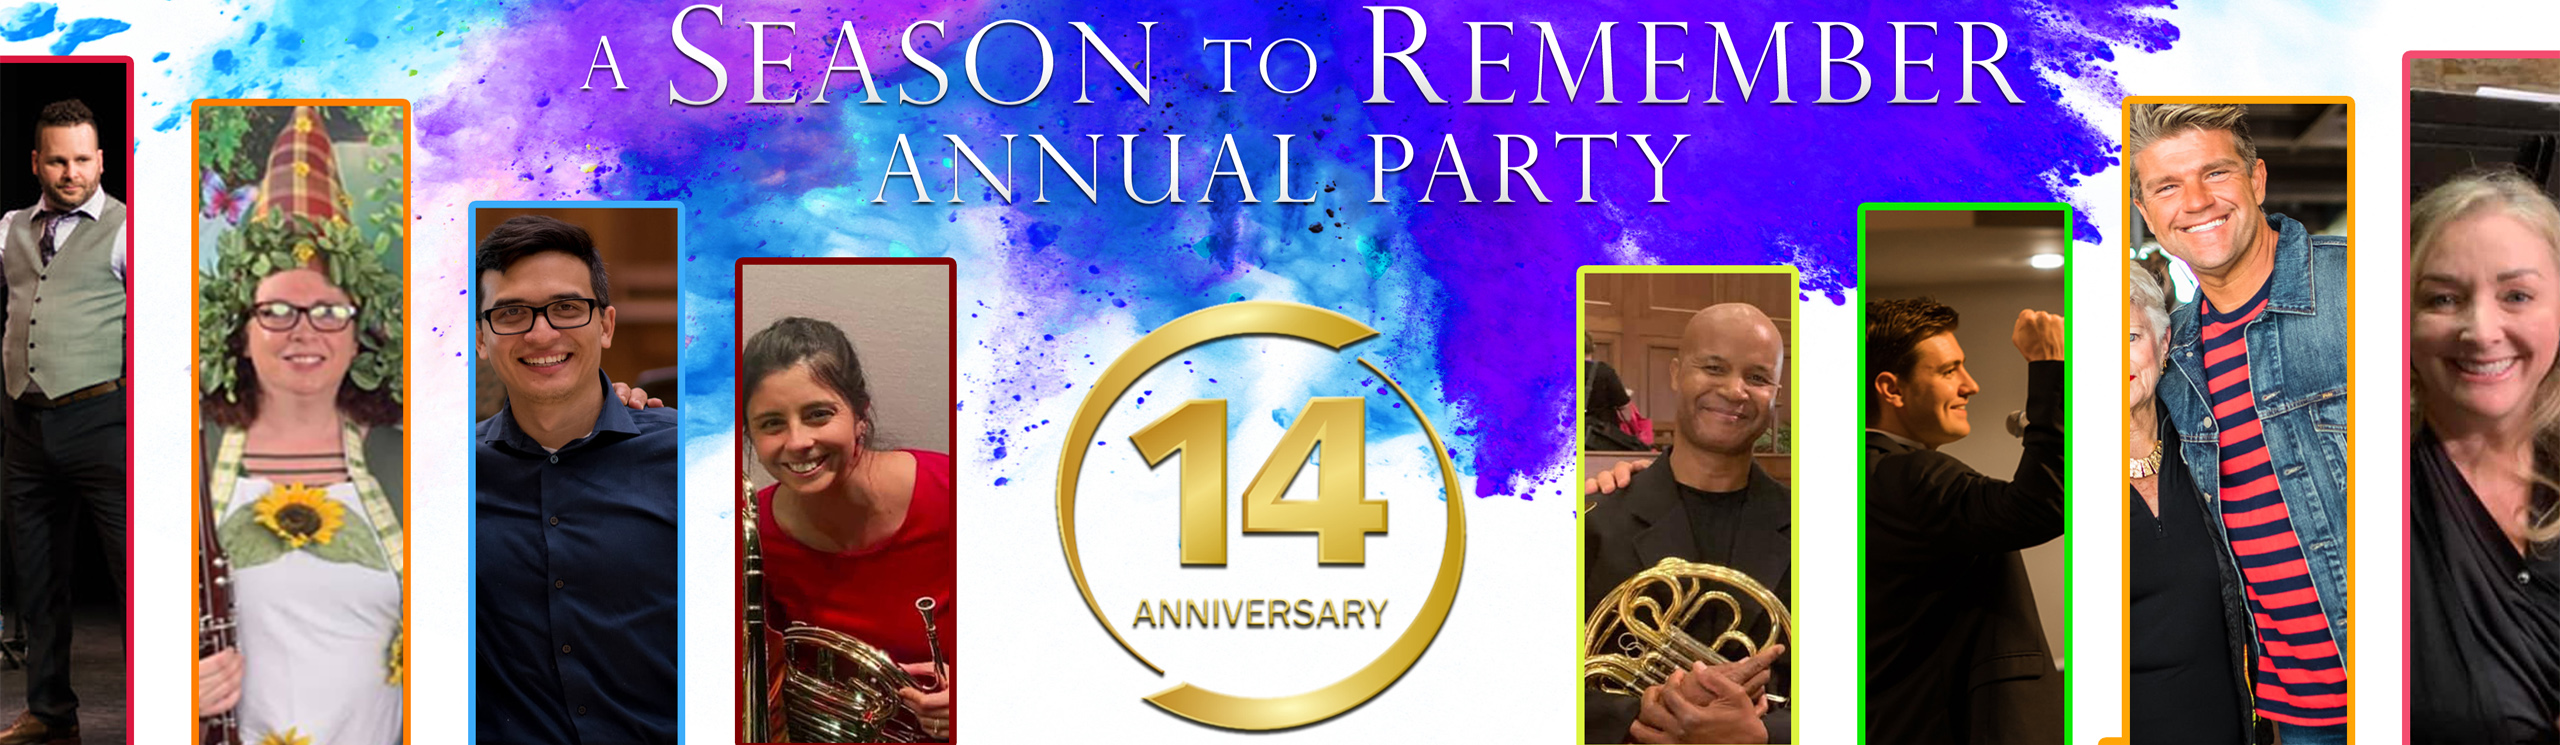 A Season to Remember – Annual Party